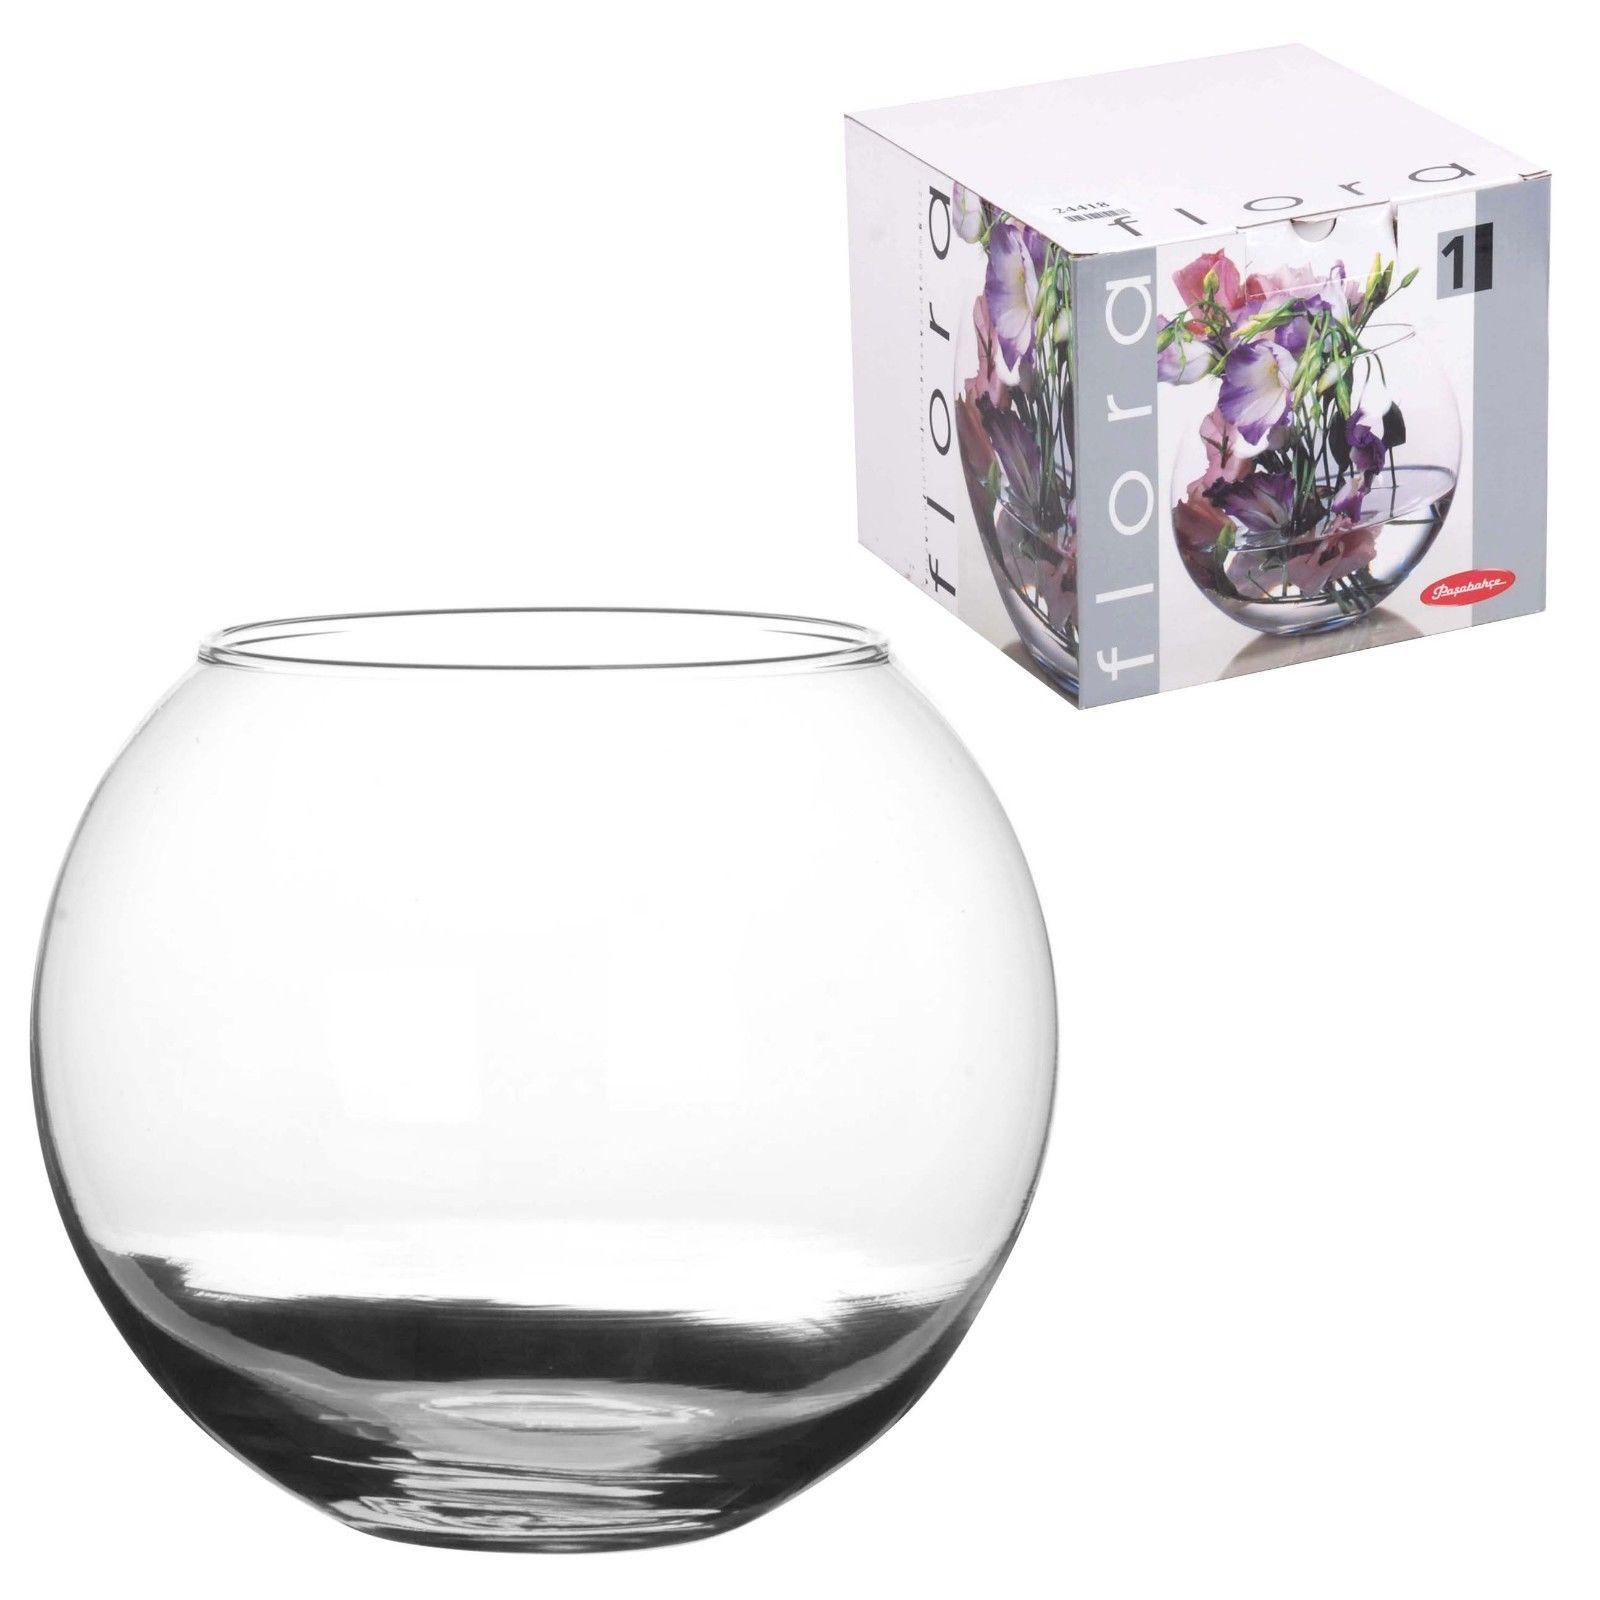 19 Unique Large Glass Ball Vase 2022 free download large glass ball vase of pasabahce glass 16cm round botanica flower vase display fish bowl with 16 cm fishbowl bubble ball bowl